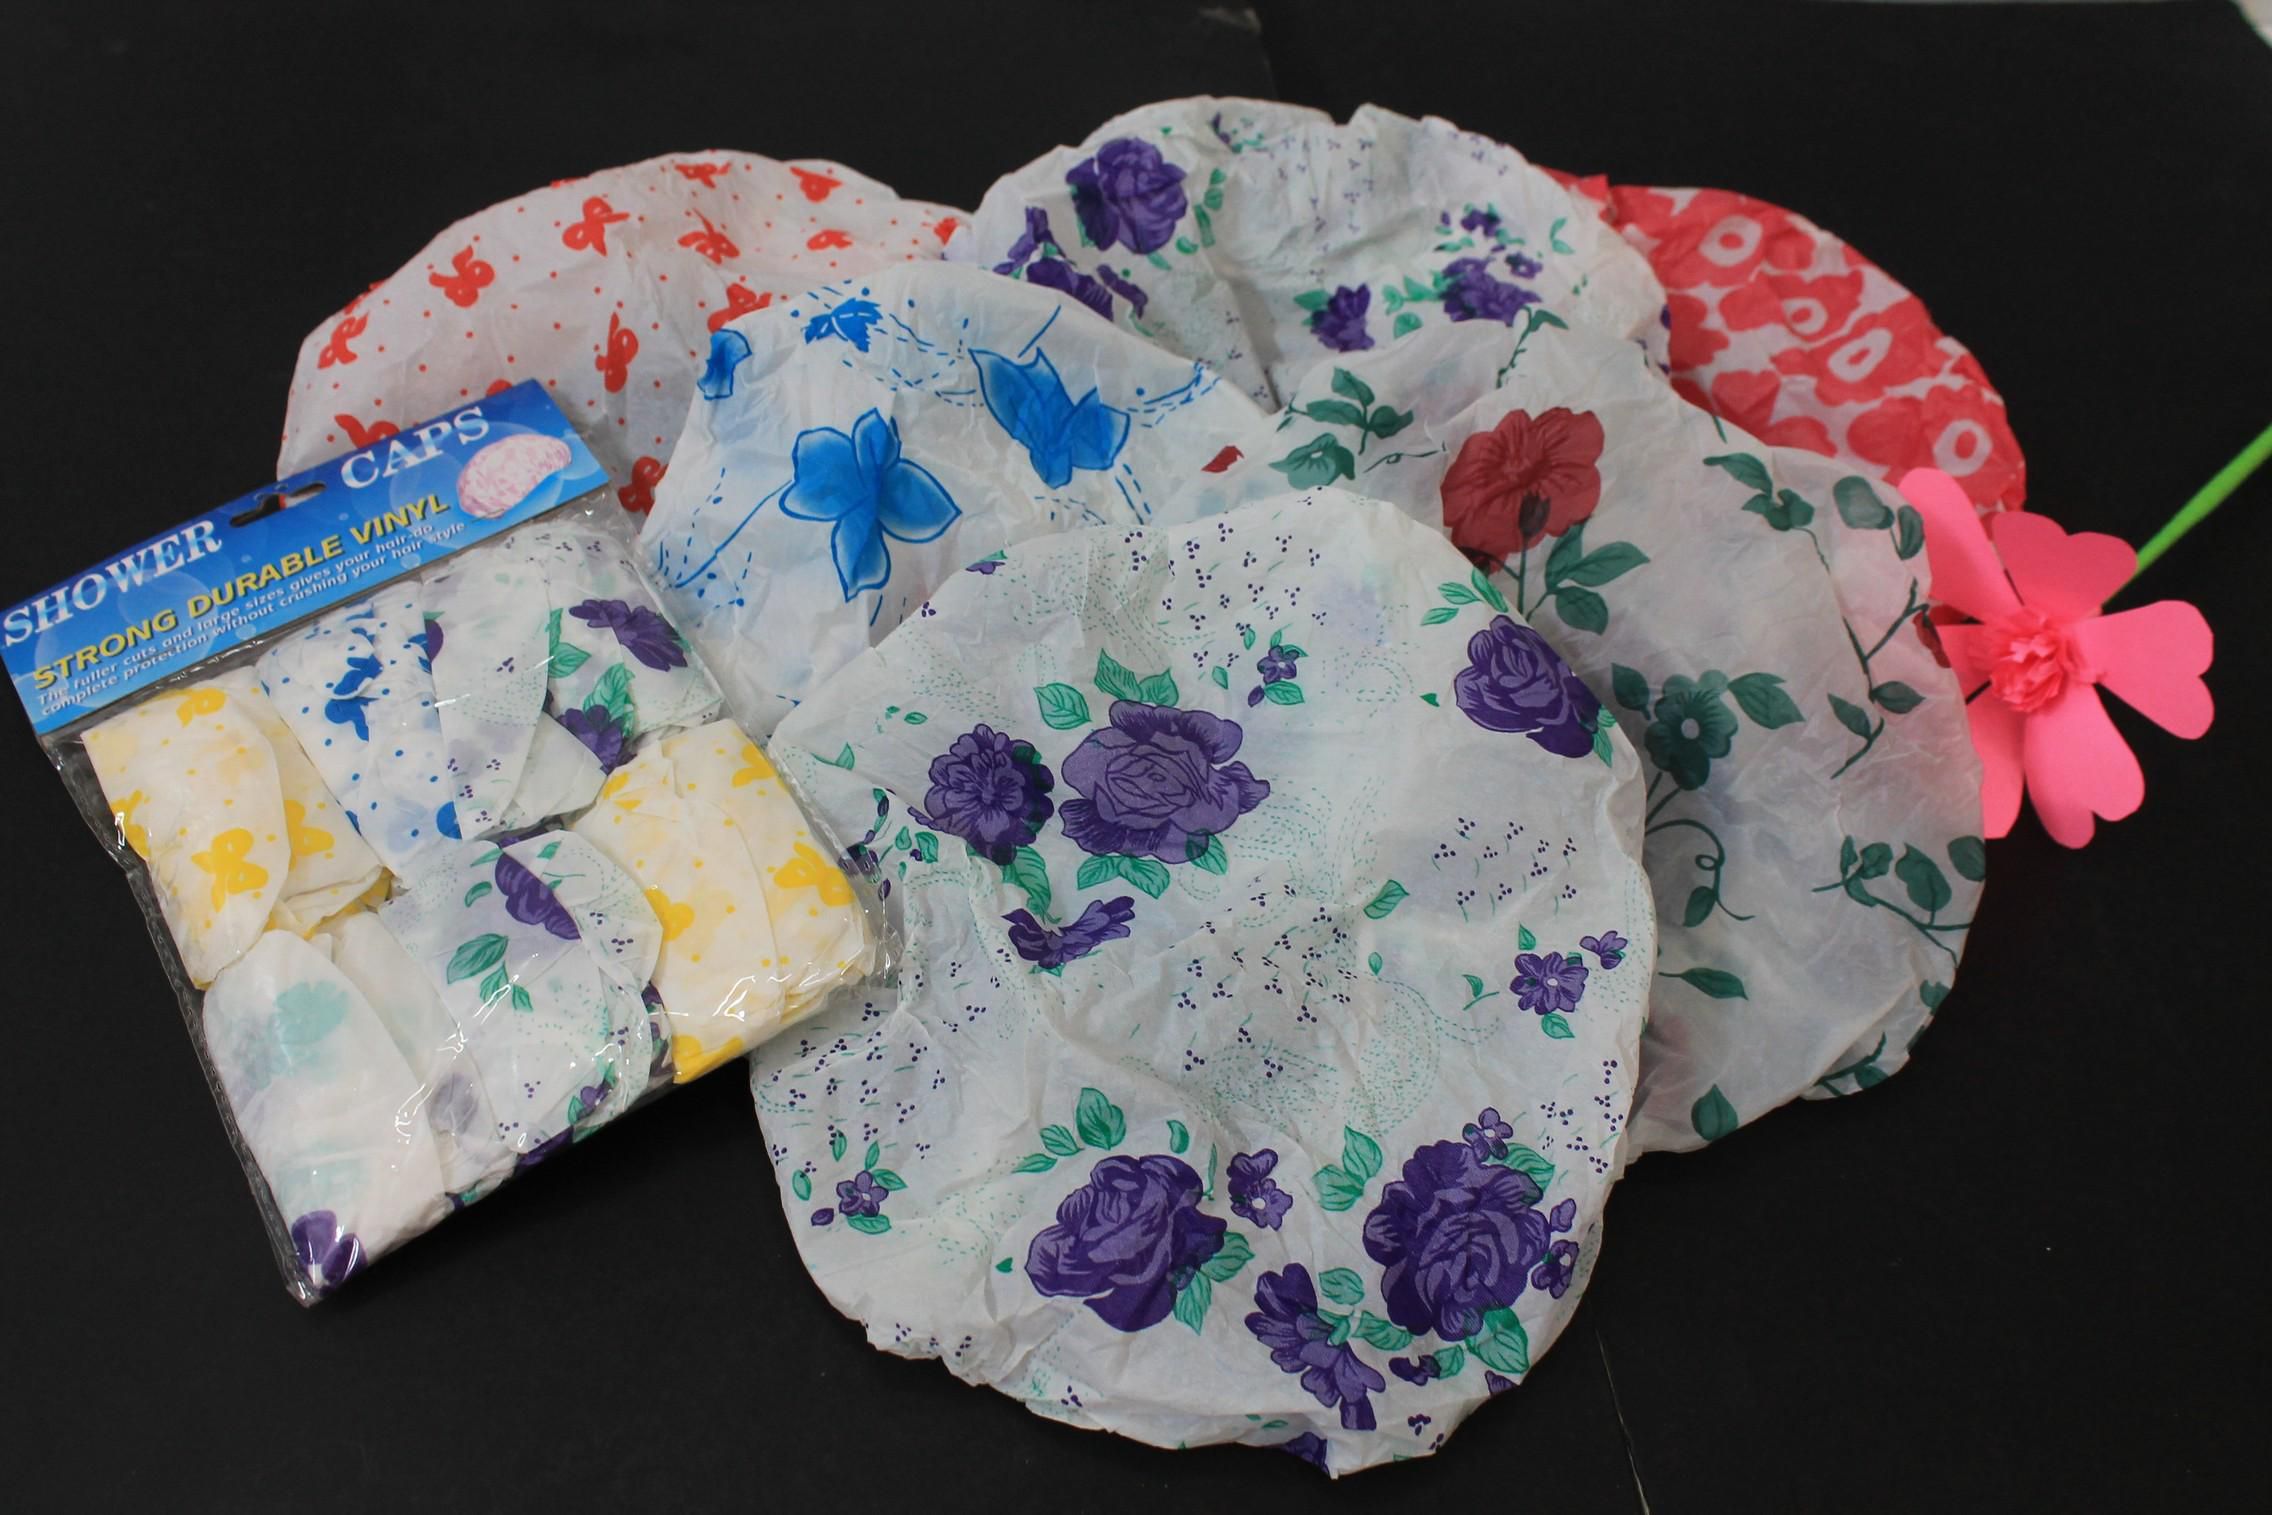 6 pcs Disposable Shower Cap with Flower Design for Bathing - Free Size